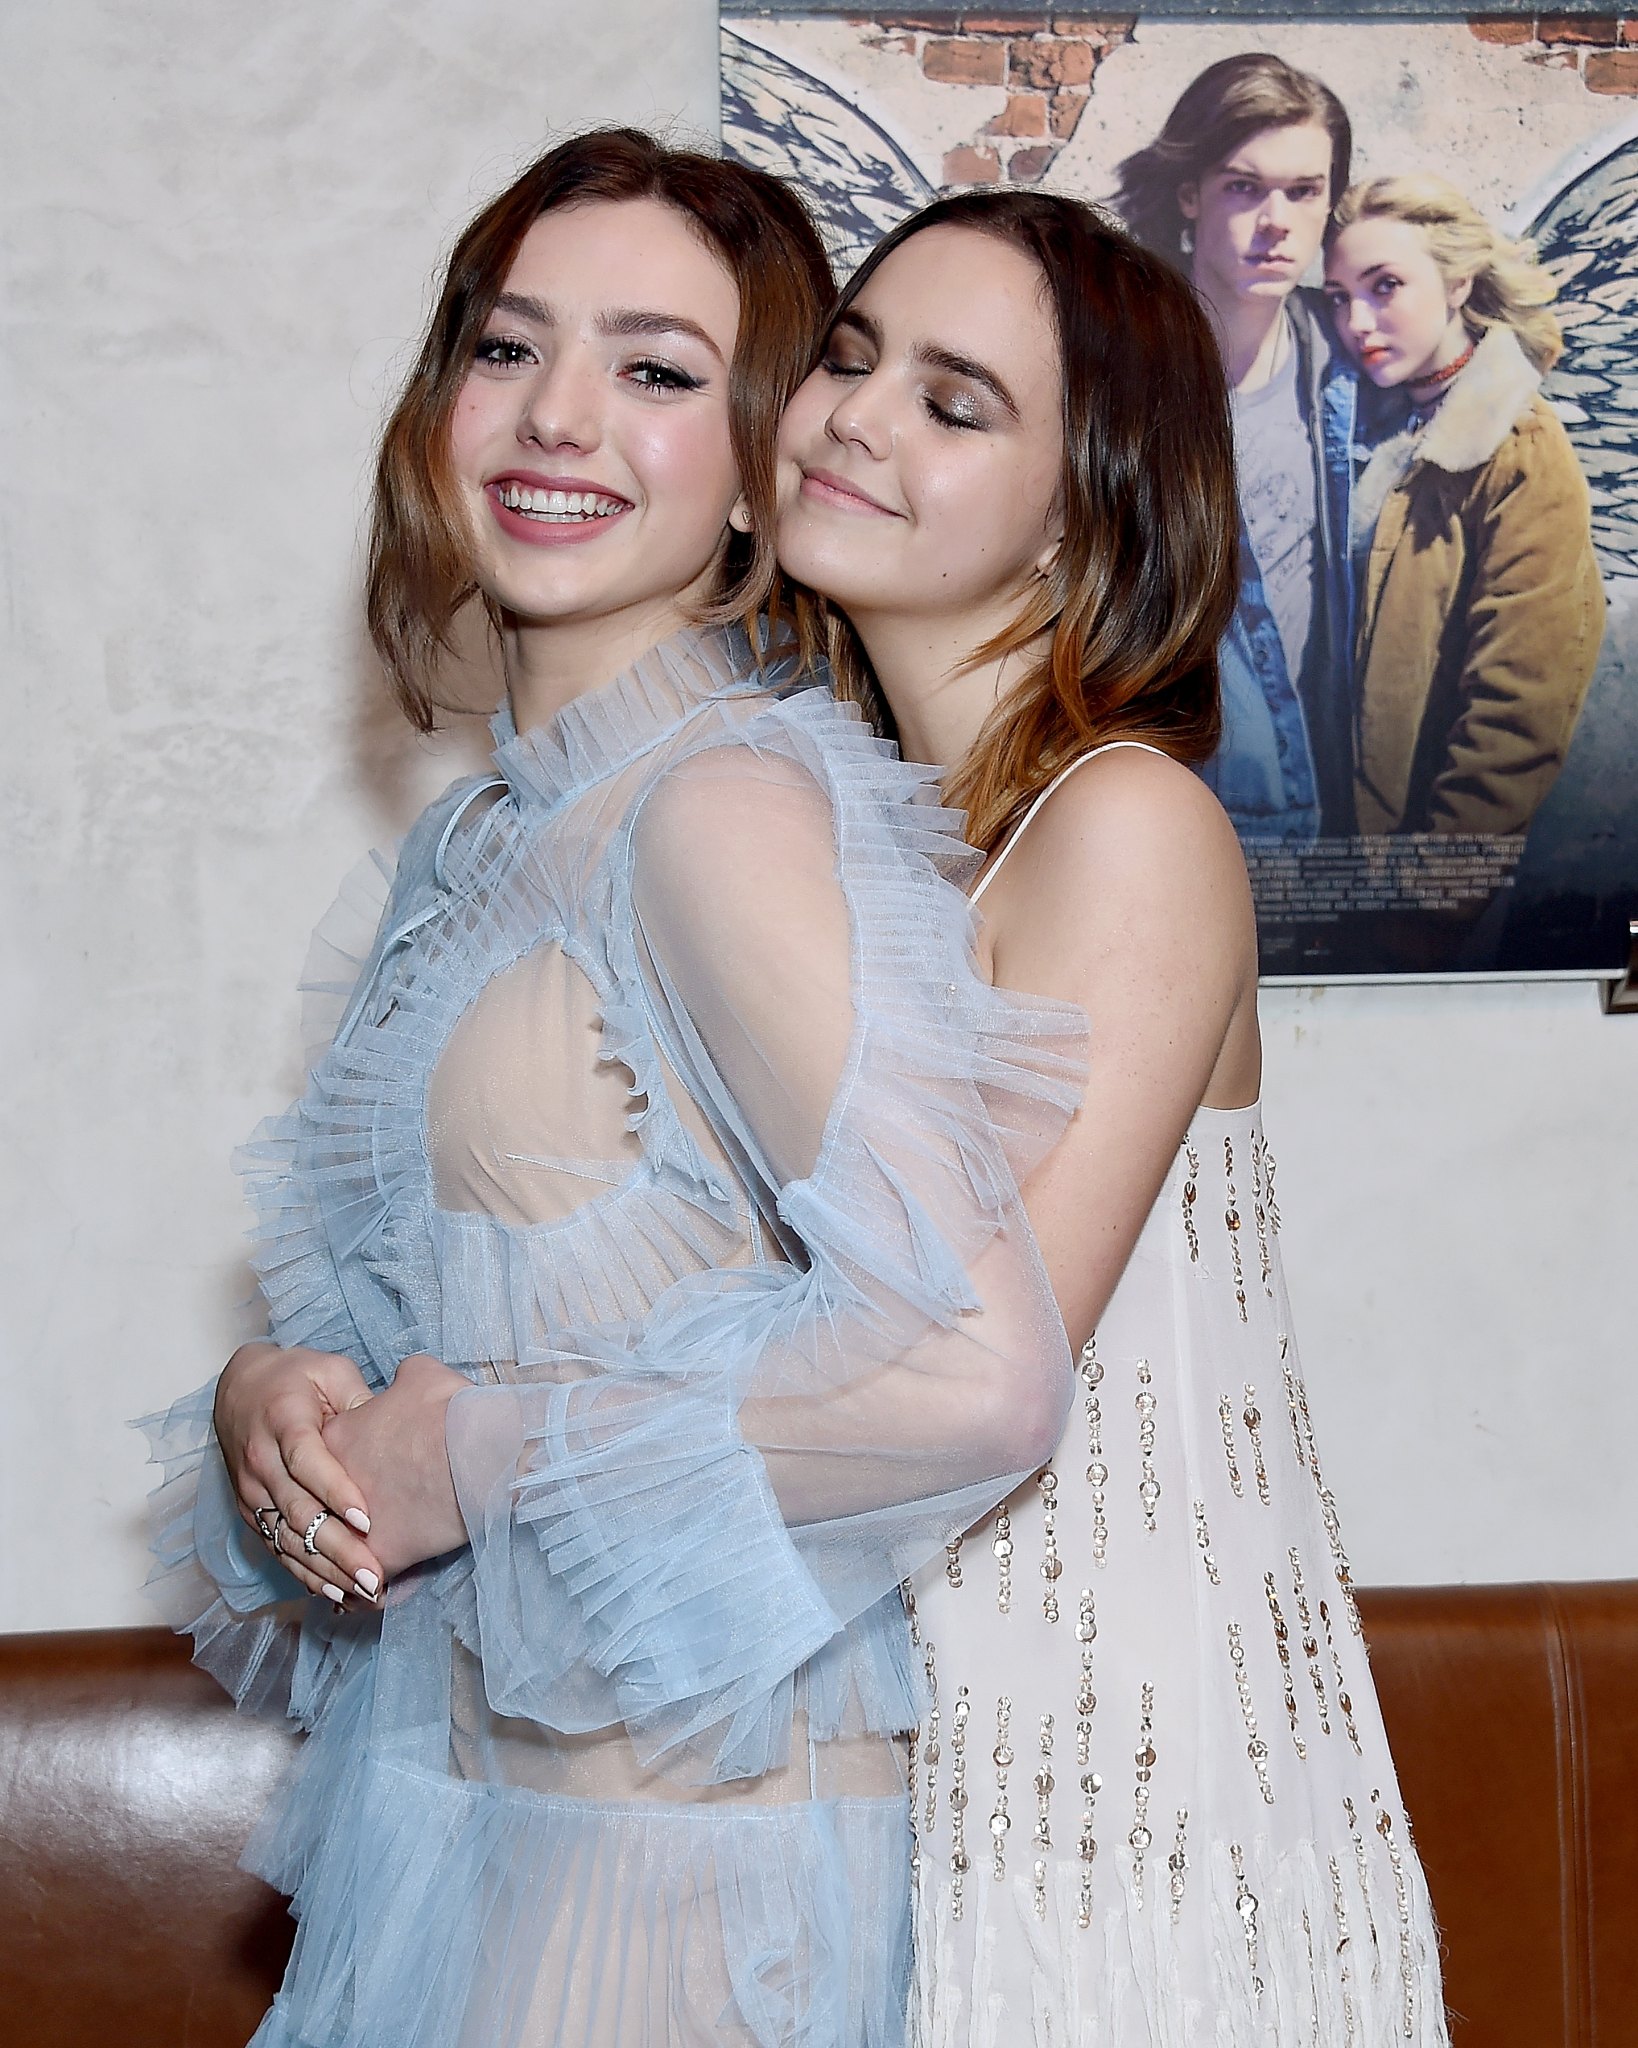 Peyton List and Bailee Madison Talk Being Compared to Other Stars | J-14